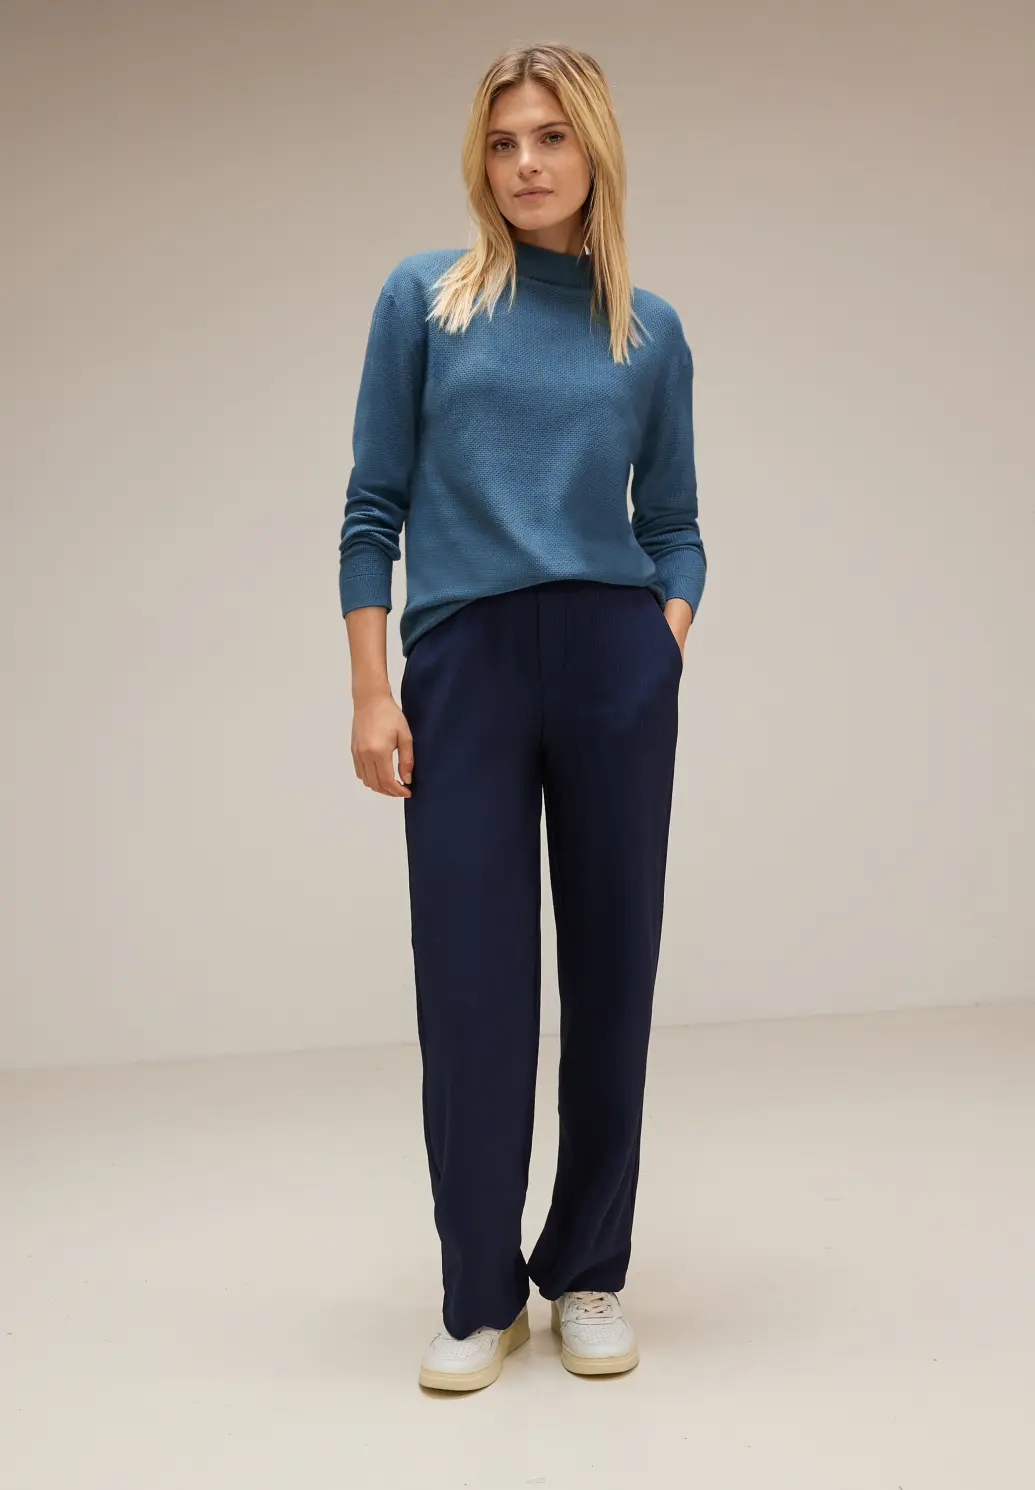 - Melange Structure Blue with - One | Satin Blues Cotton Street Knit Jumper